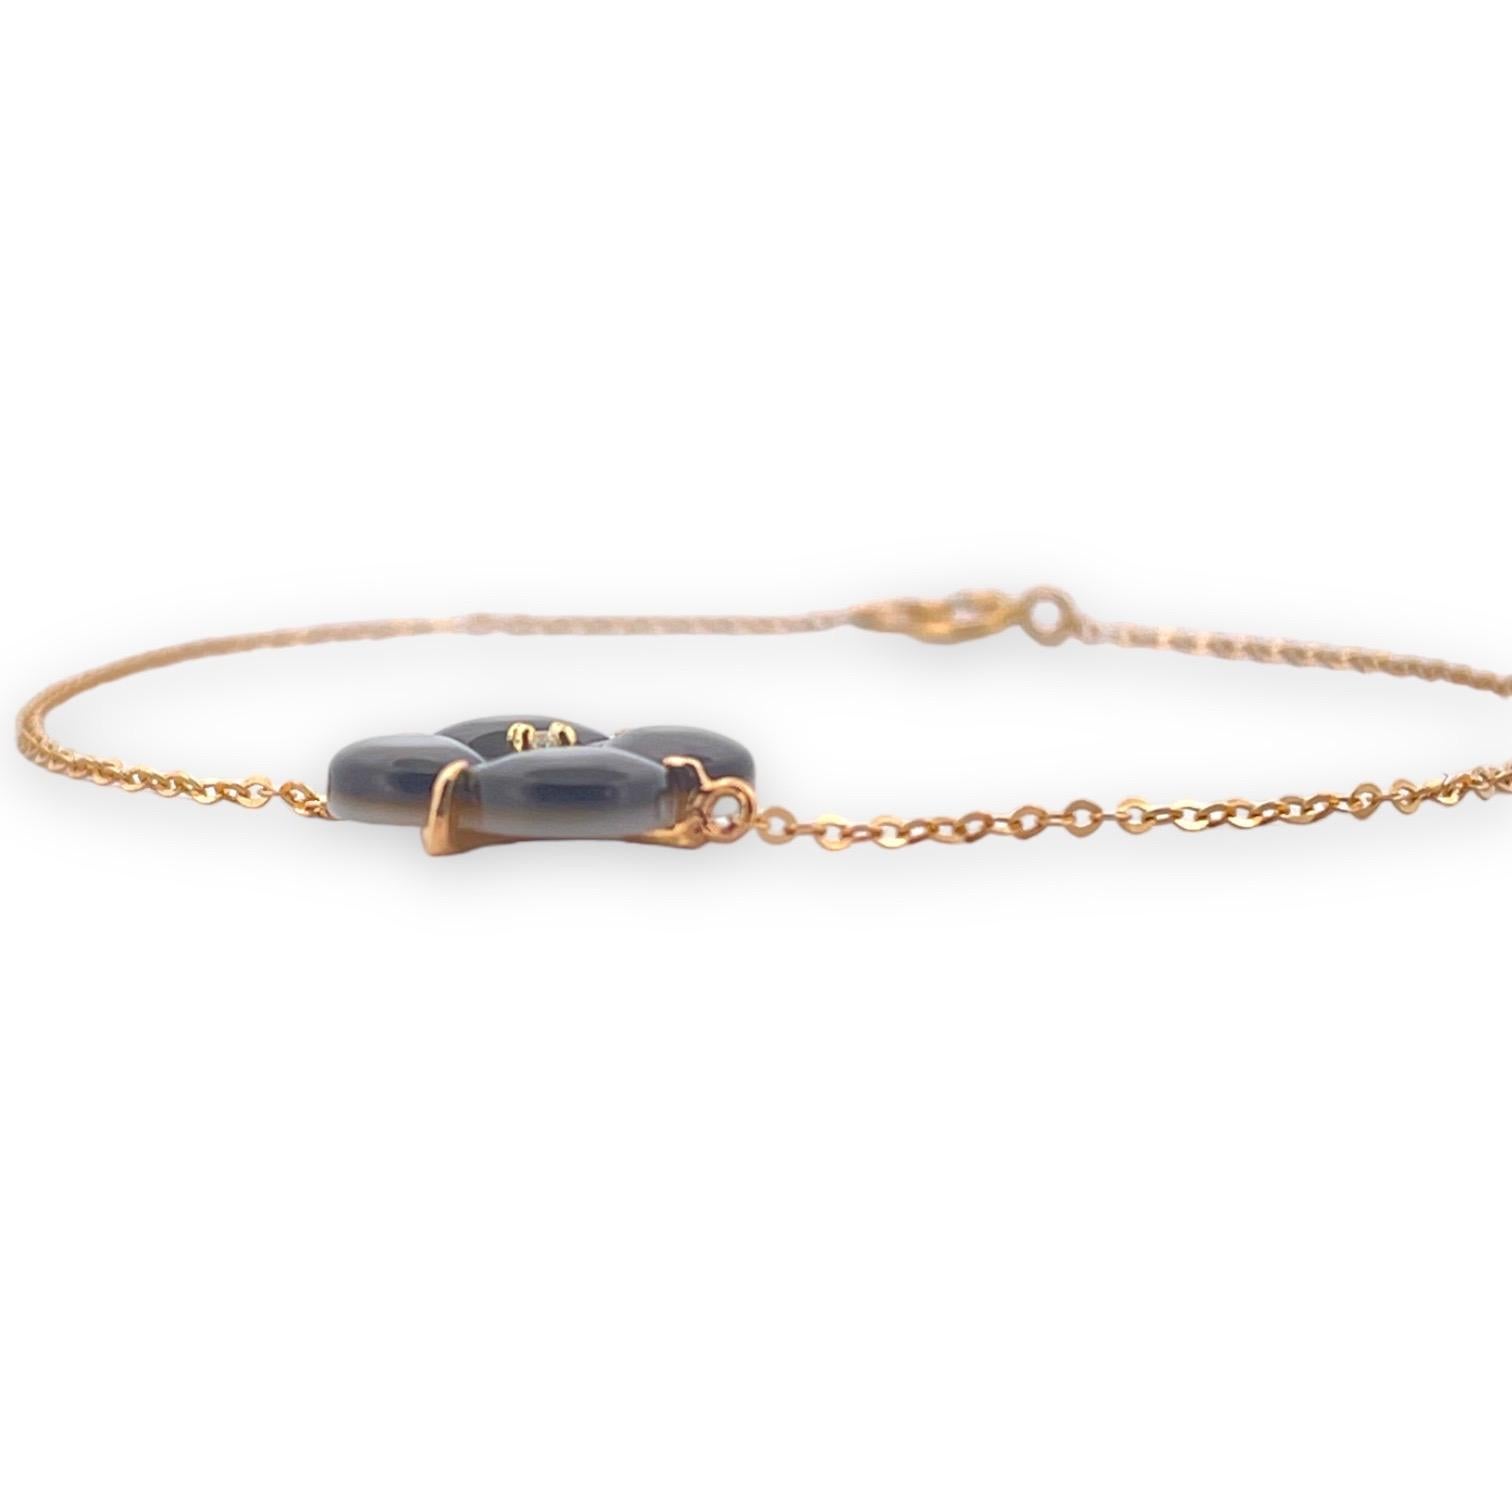 The 18K yellow gold midnight mother of pearl clover bracelet is a dazzling and refined accessory that seamlessly blends classic elegance style.
Crafted from solid 18-karat yellow gold, the bracelet features a series of clover motifs, each adorned